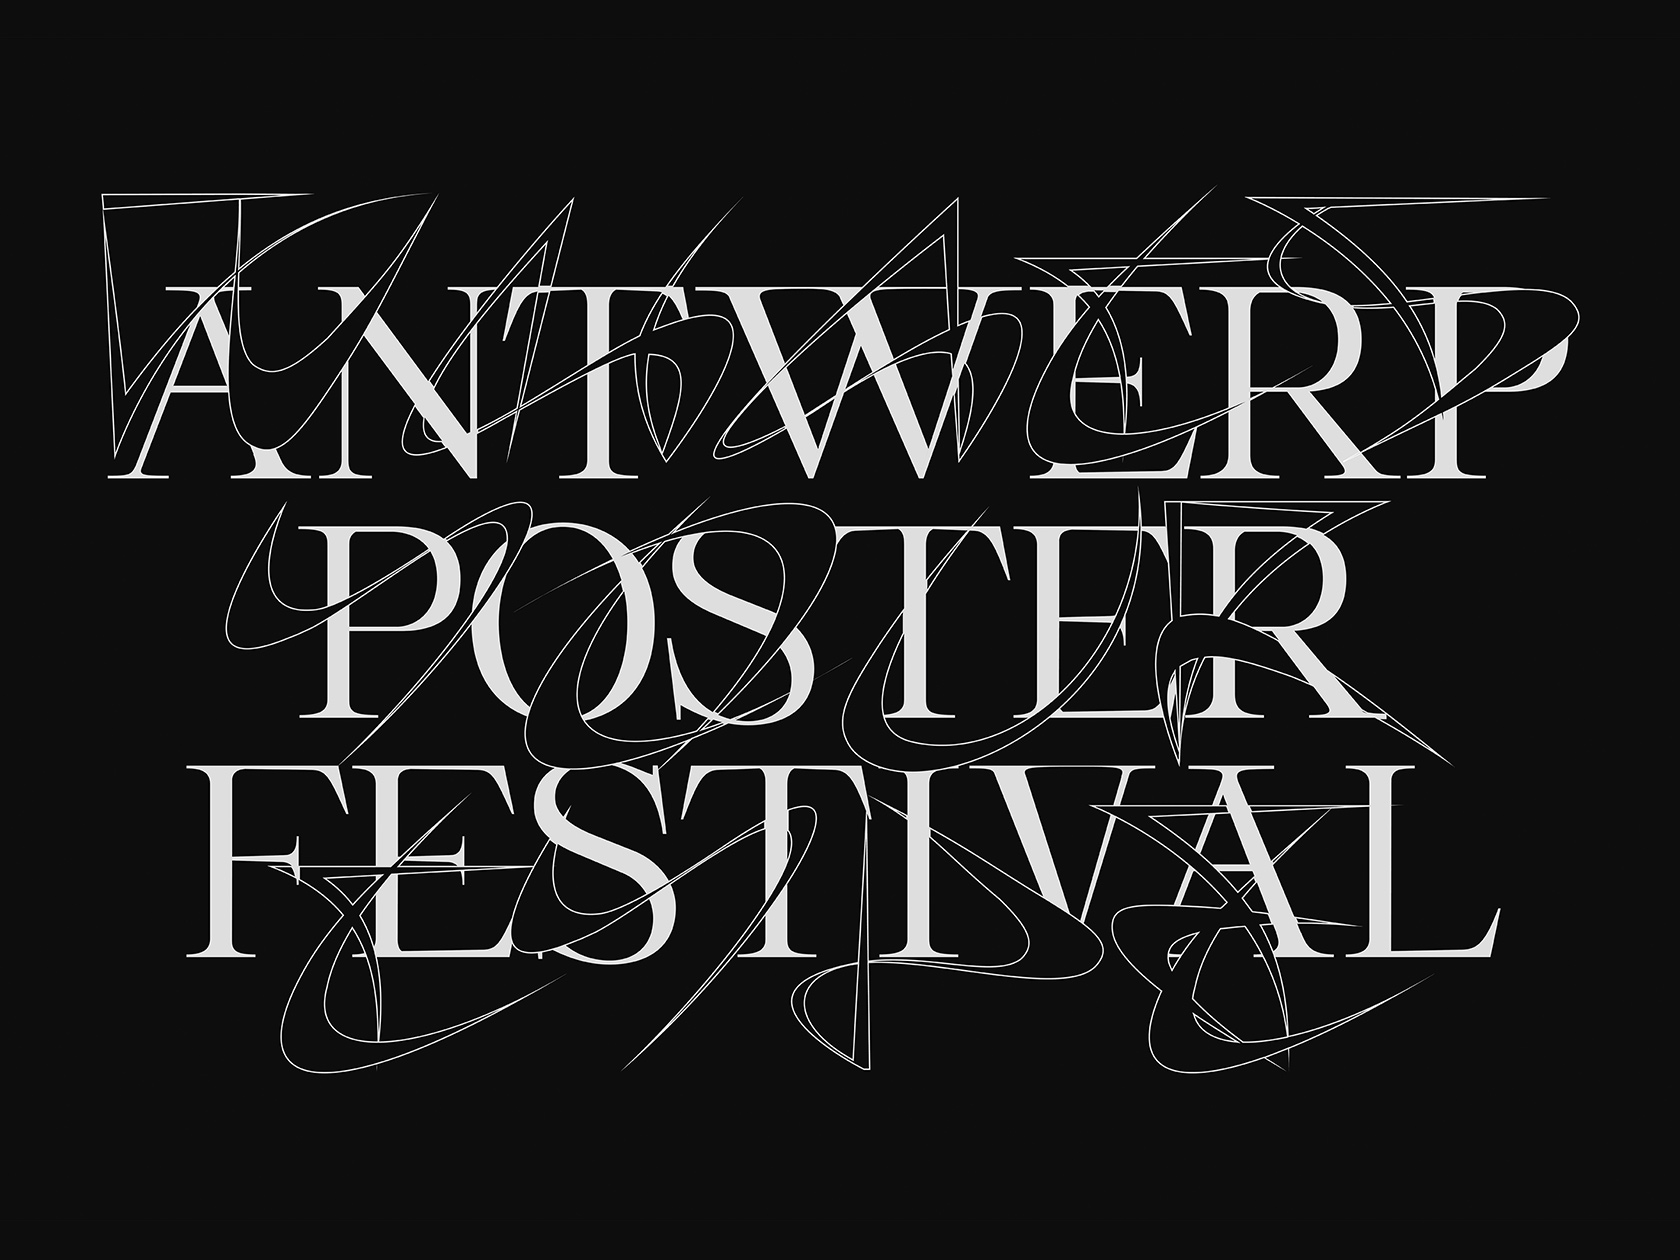 This year’s identity of The Antwerp Poster Festival by ssnn and Typelab showcases experimental type design